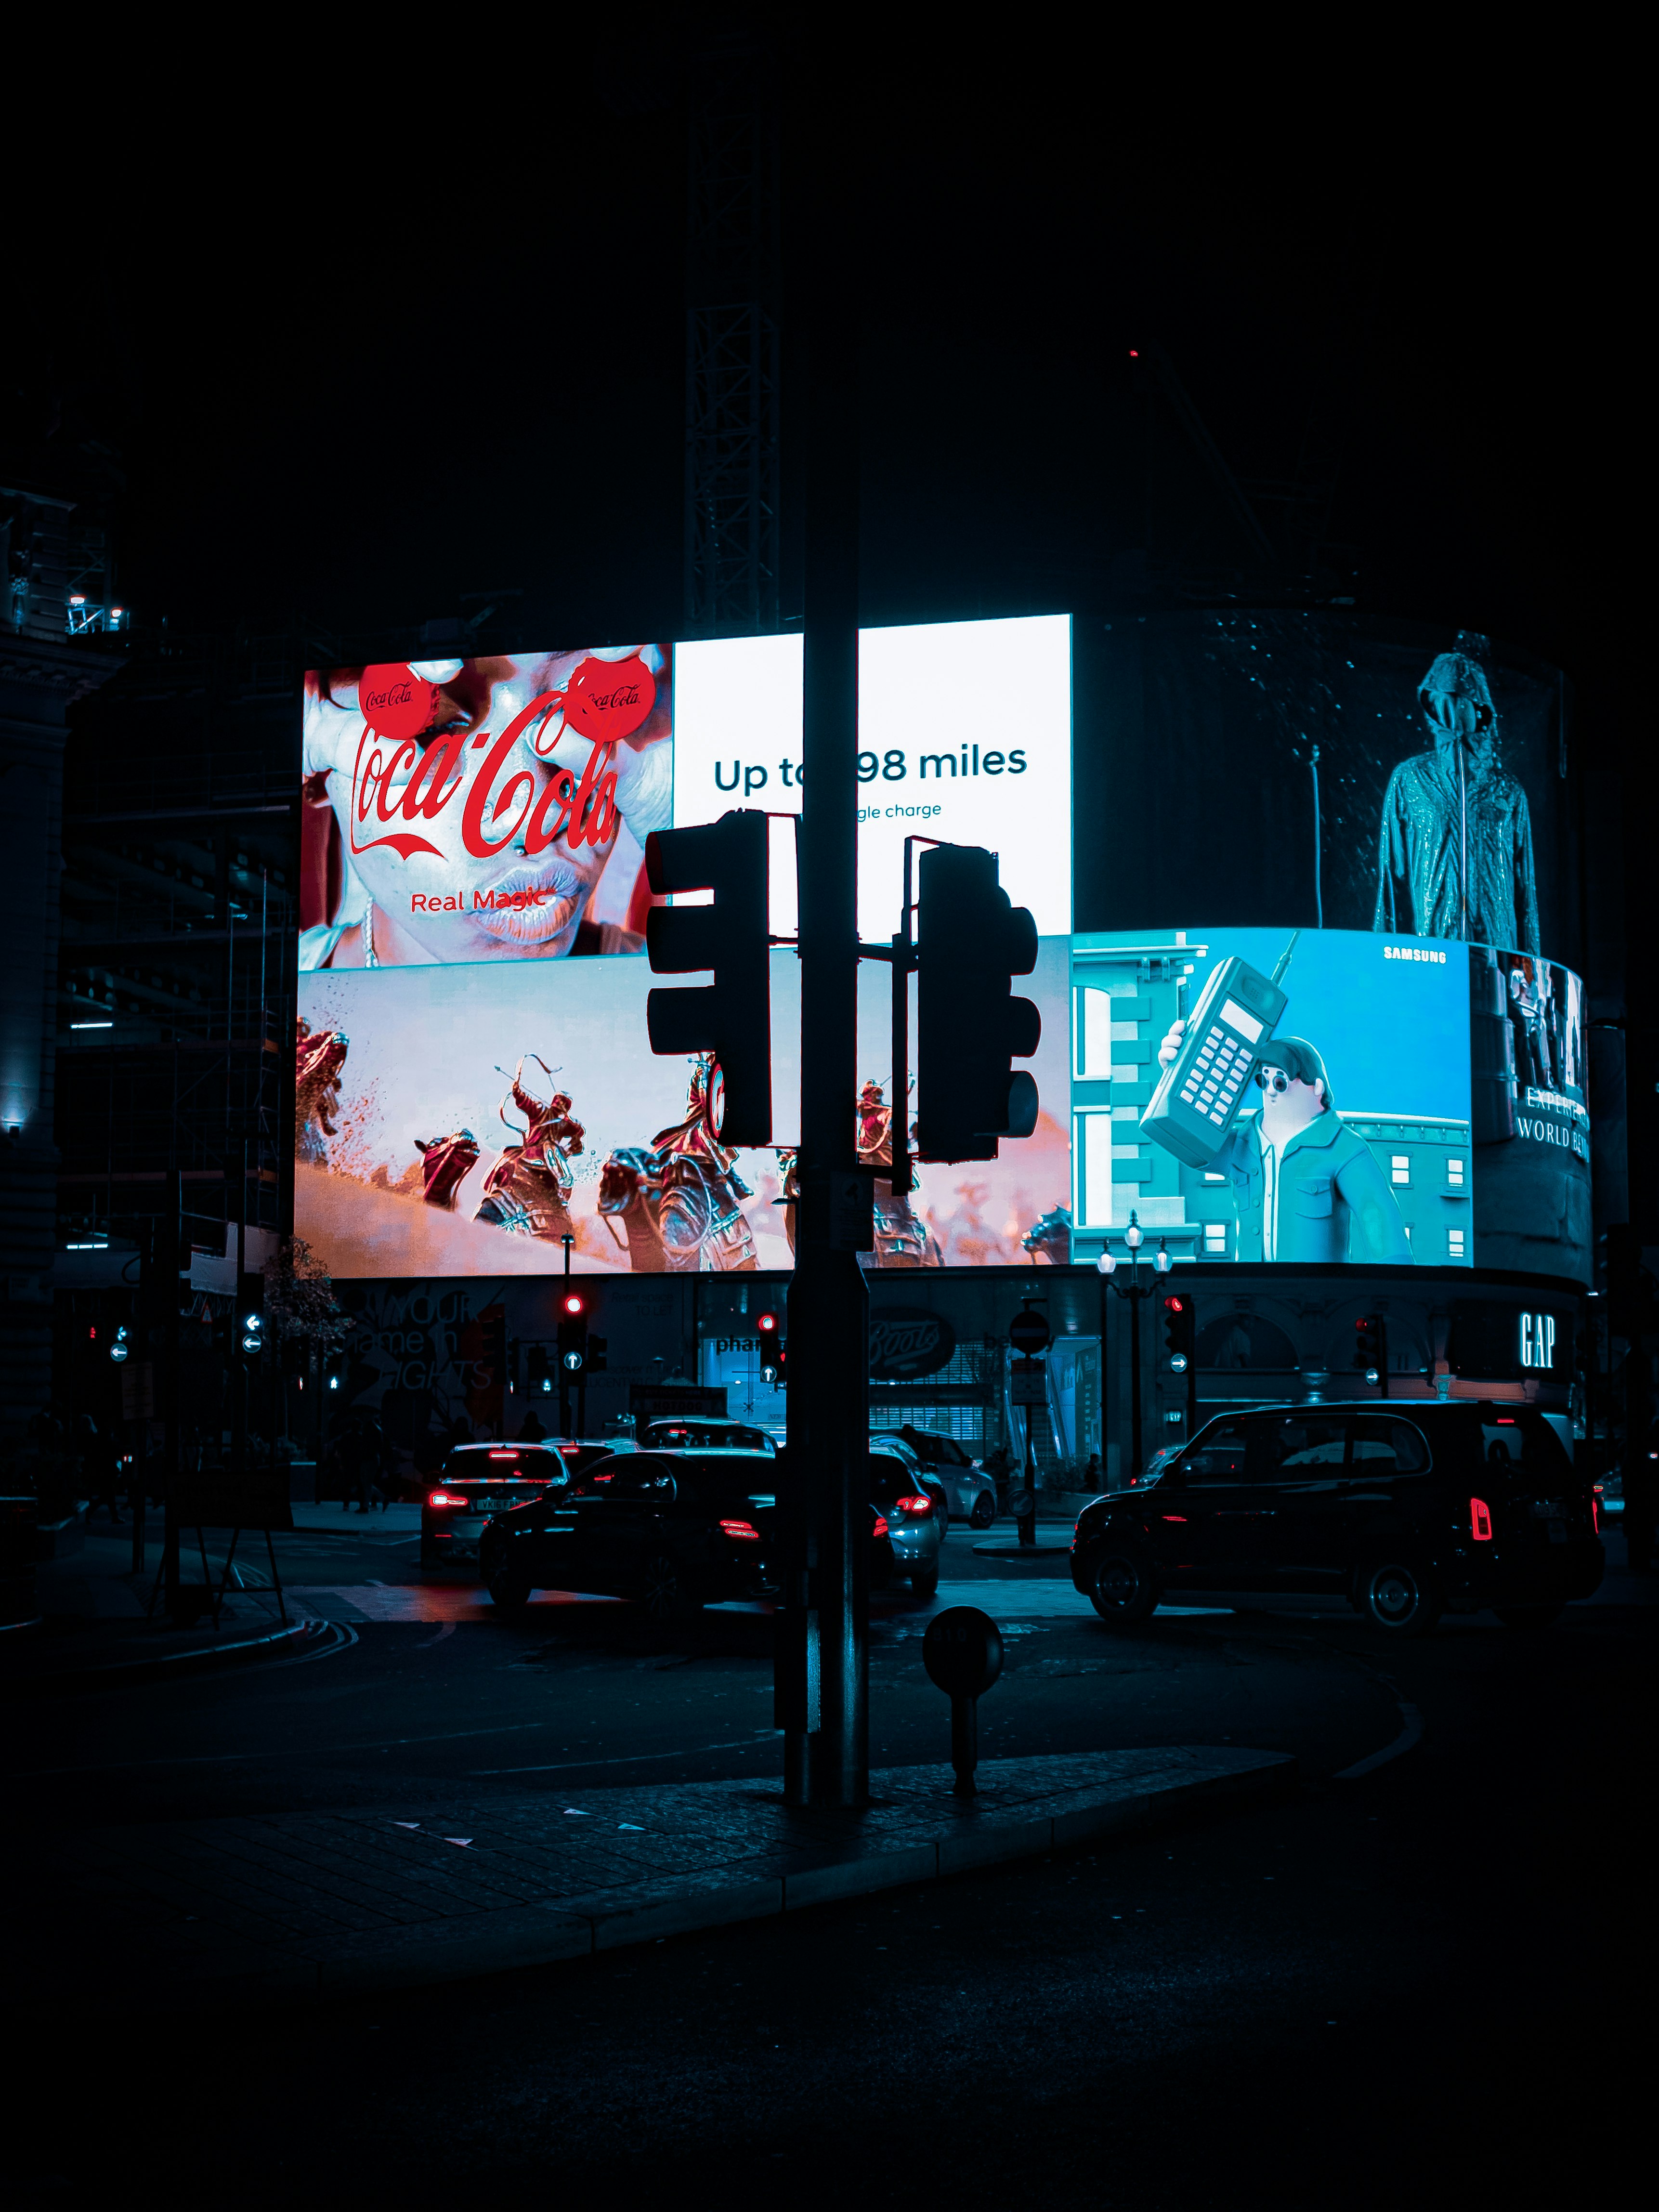 Advertisement display by night in London